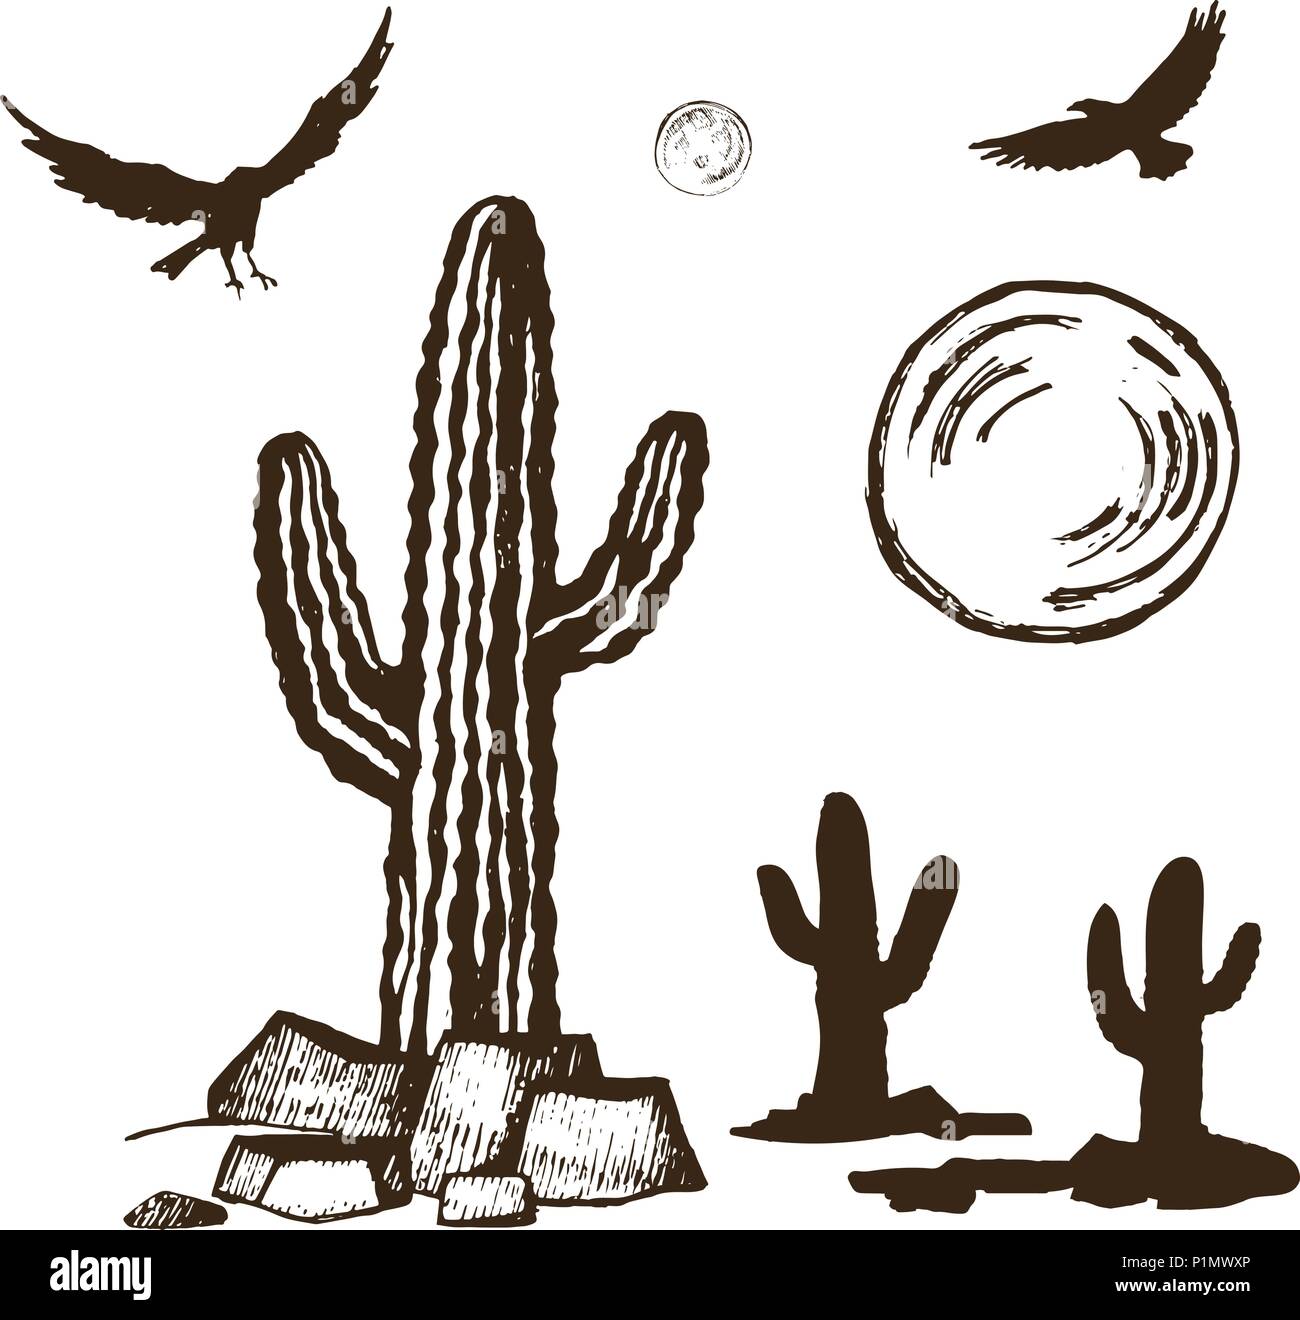 Cacti and silhouettes ravens set Stock Vector